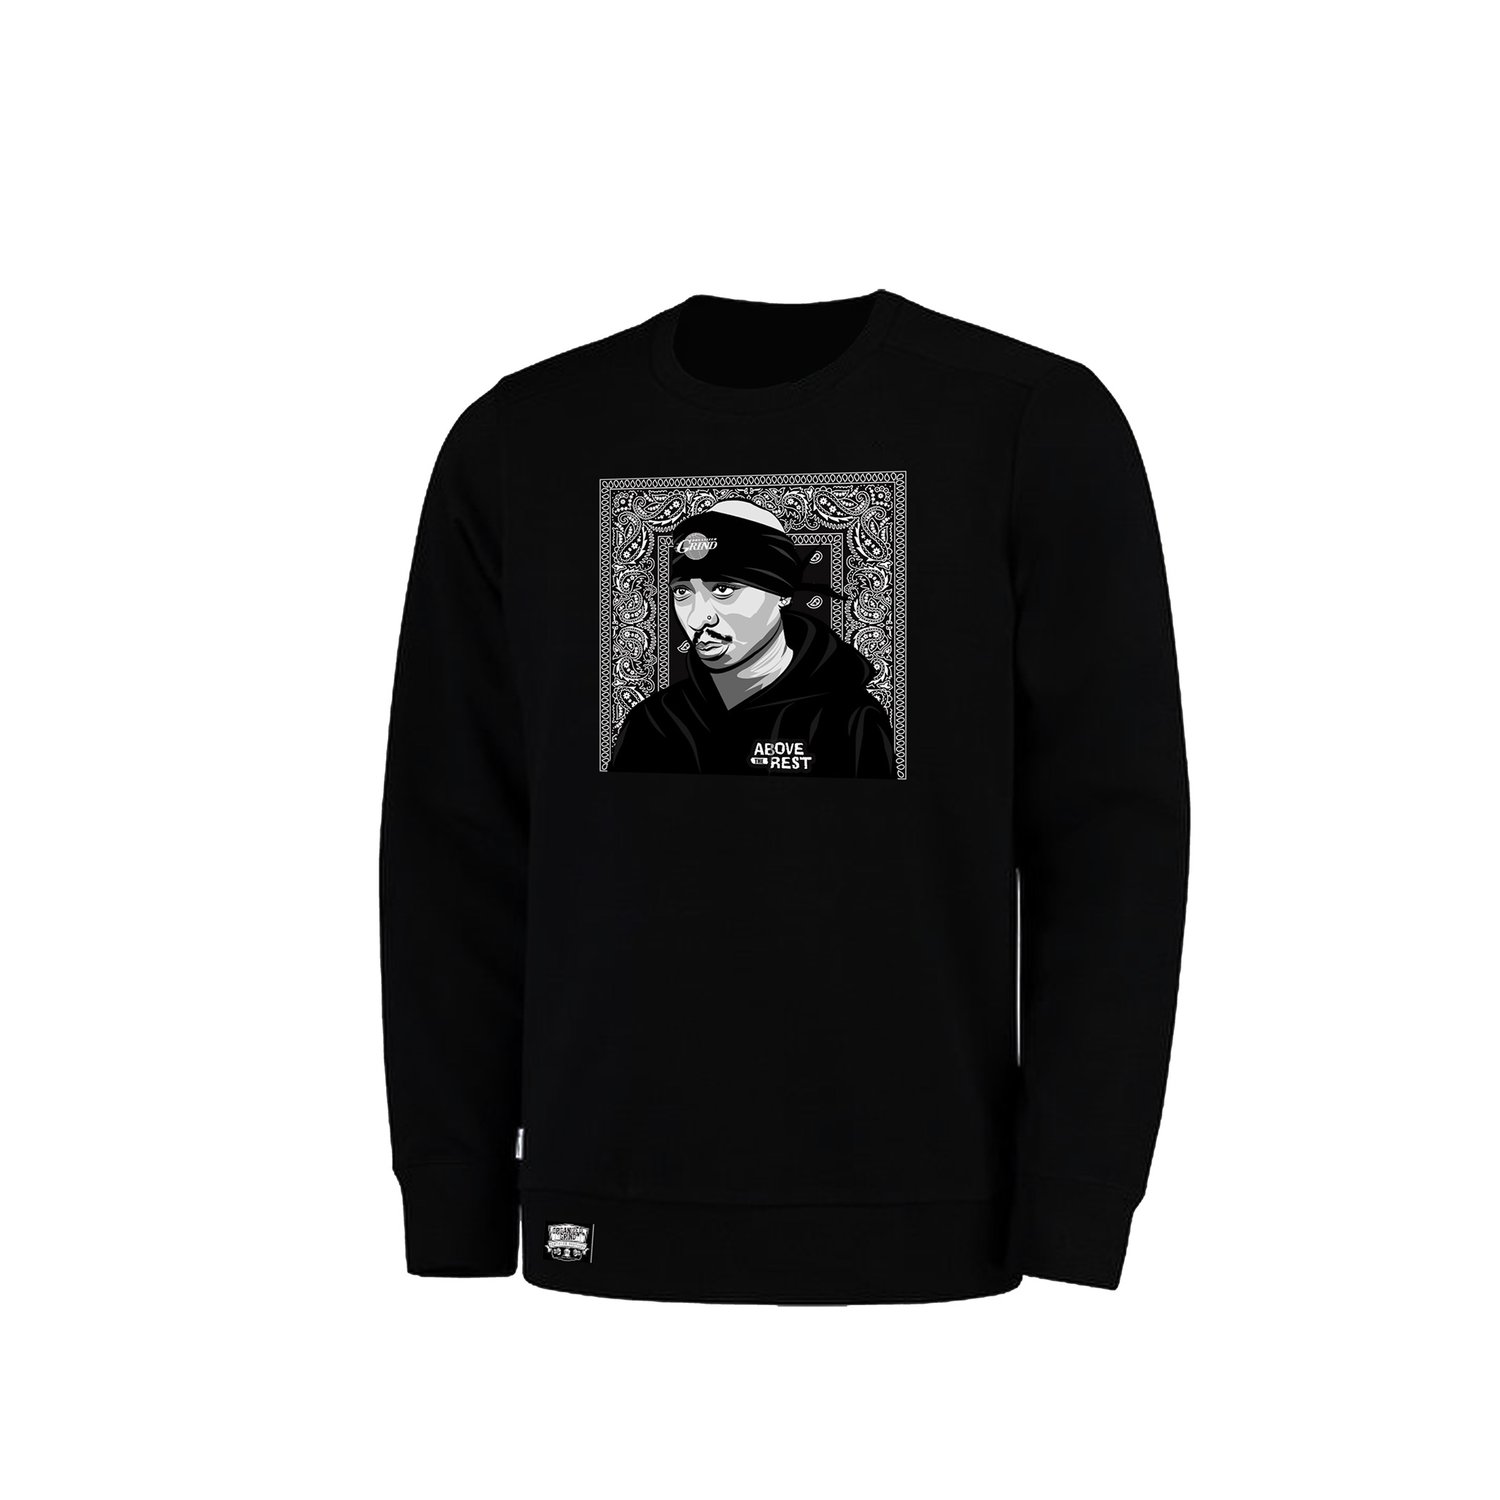 Image of 2Pac “Above The Rest” Sweaters & Beanies 